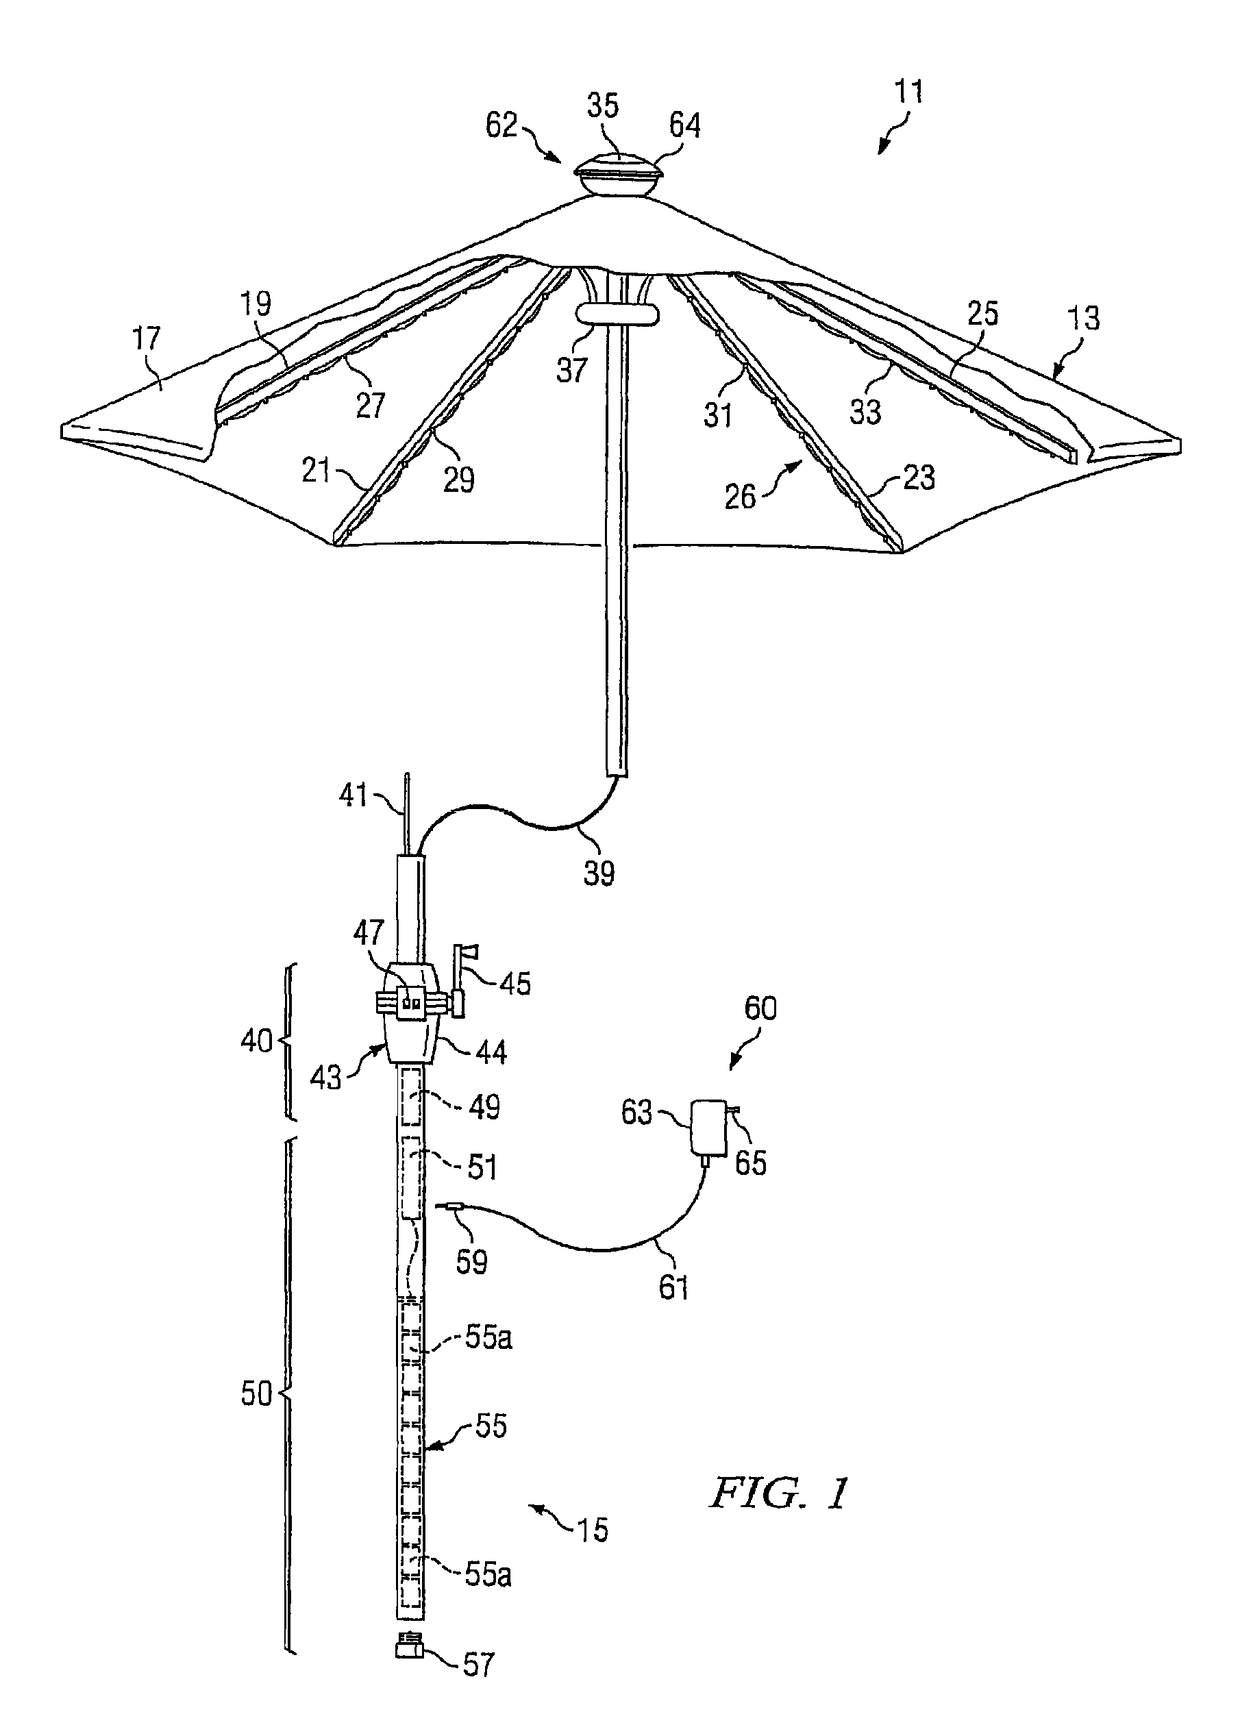 Umbrella opening and closing system